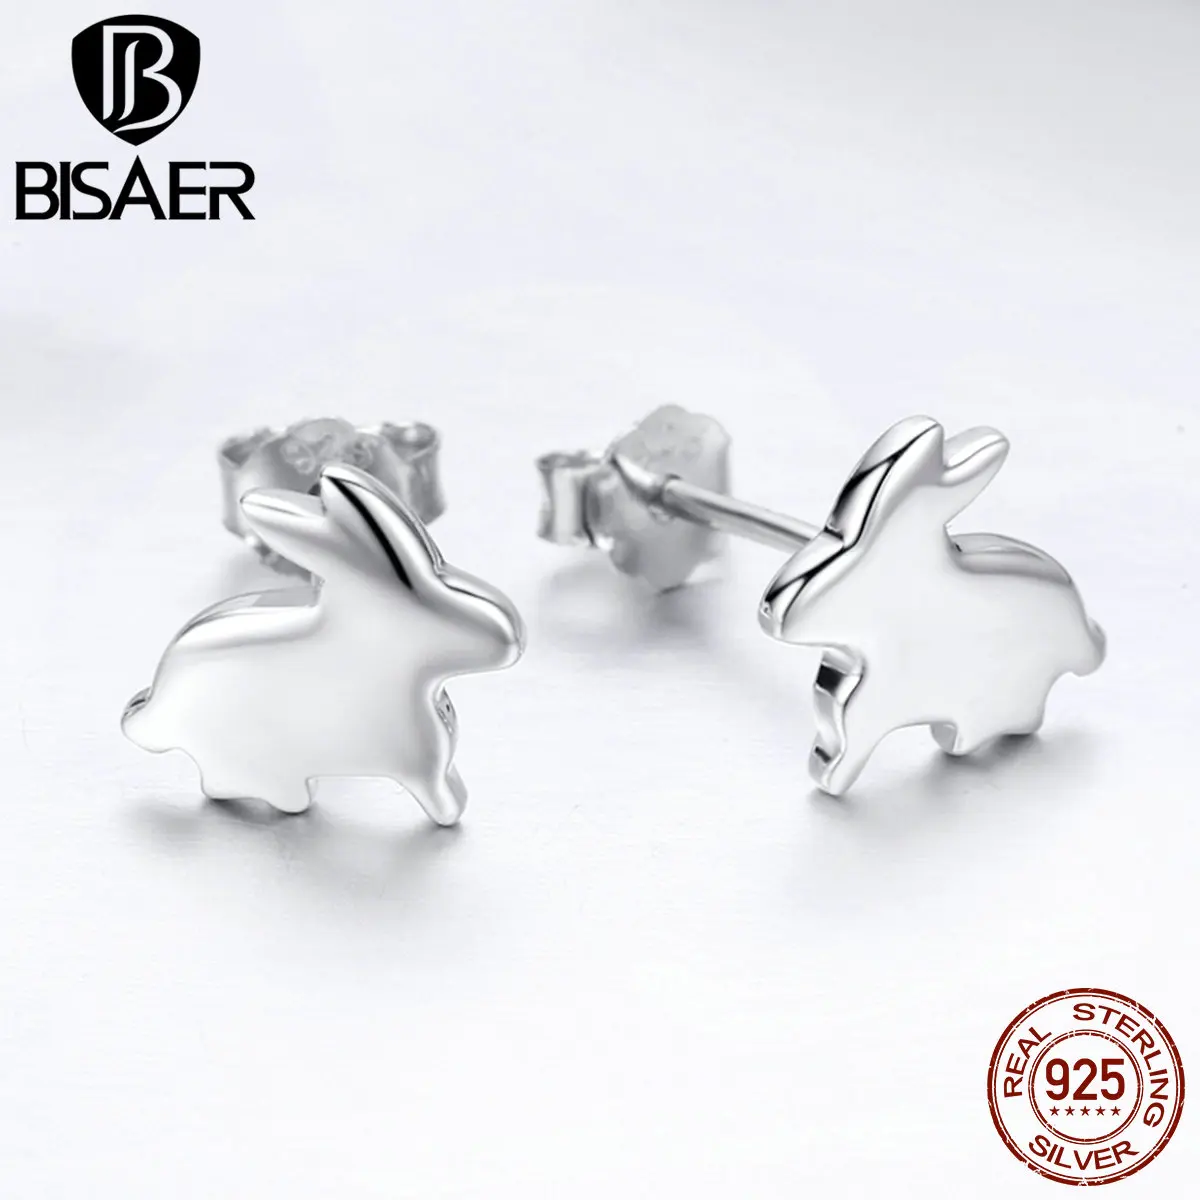 

BISAER Bijoux Hot Sale 925 Sterling Silver Rabbit Exquisite Small Stud Earrings for Women Fashion Silver Earrings Jewelry GXE294